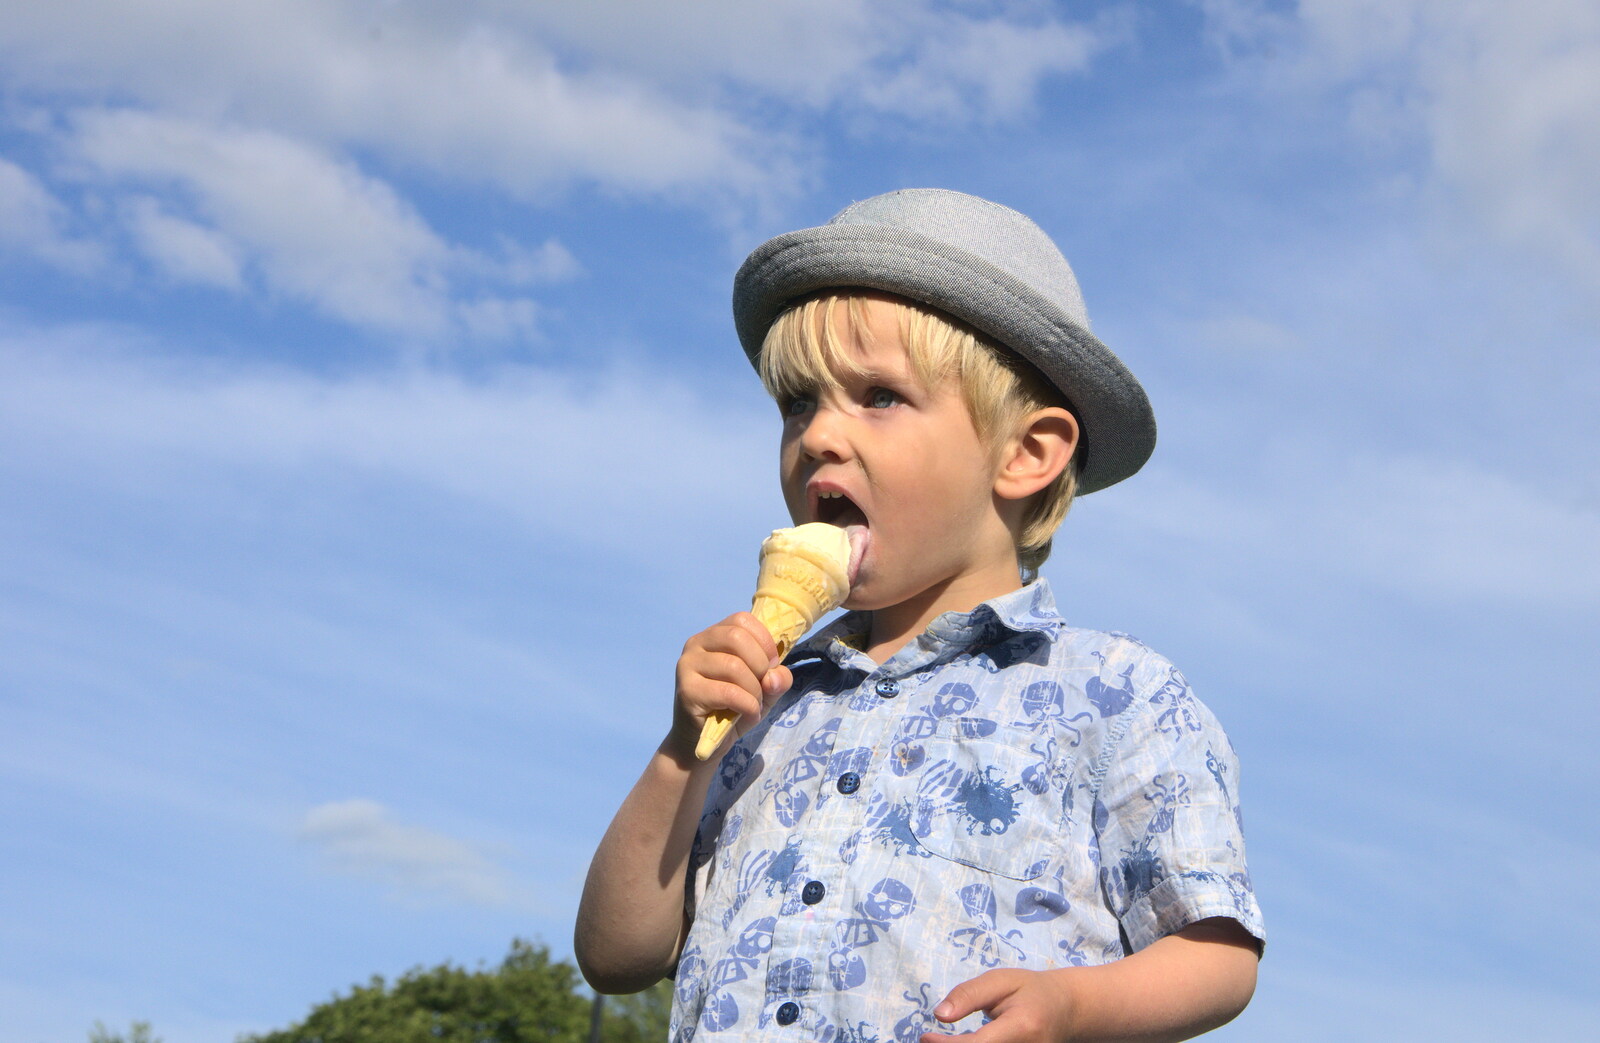 Harry and his Ice Cream from Punting With Grandad, Cambridge, Cambridgeshire - 6th June 2015